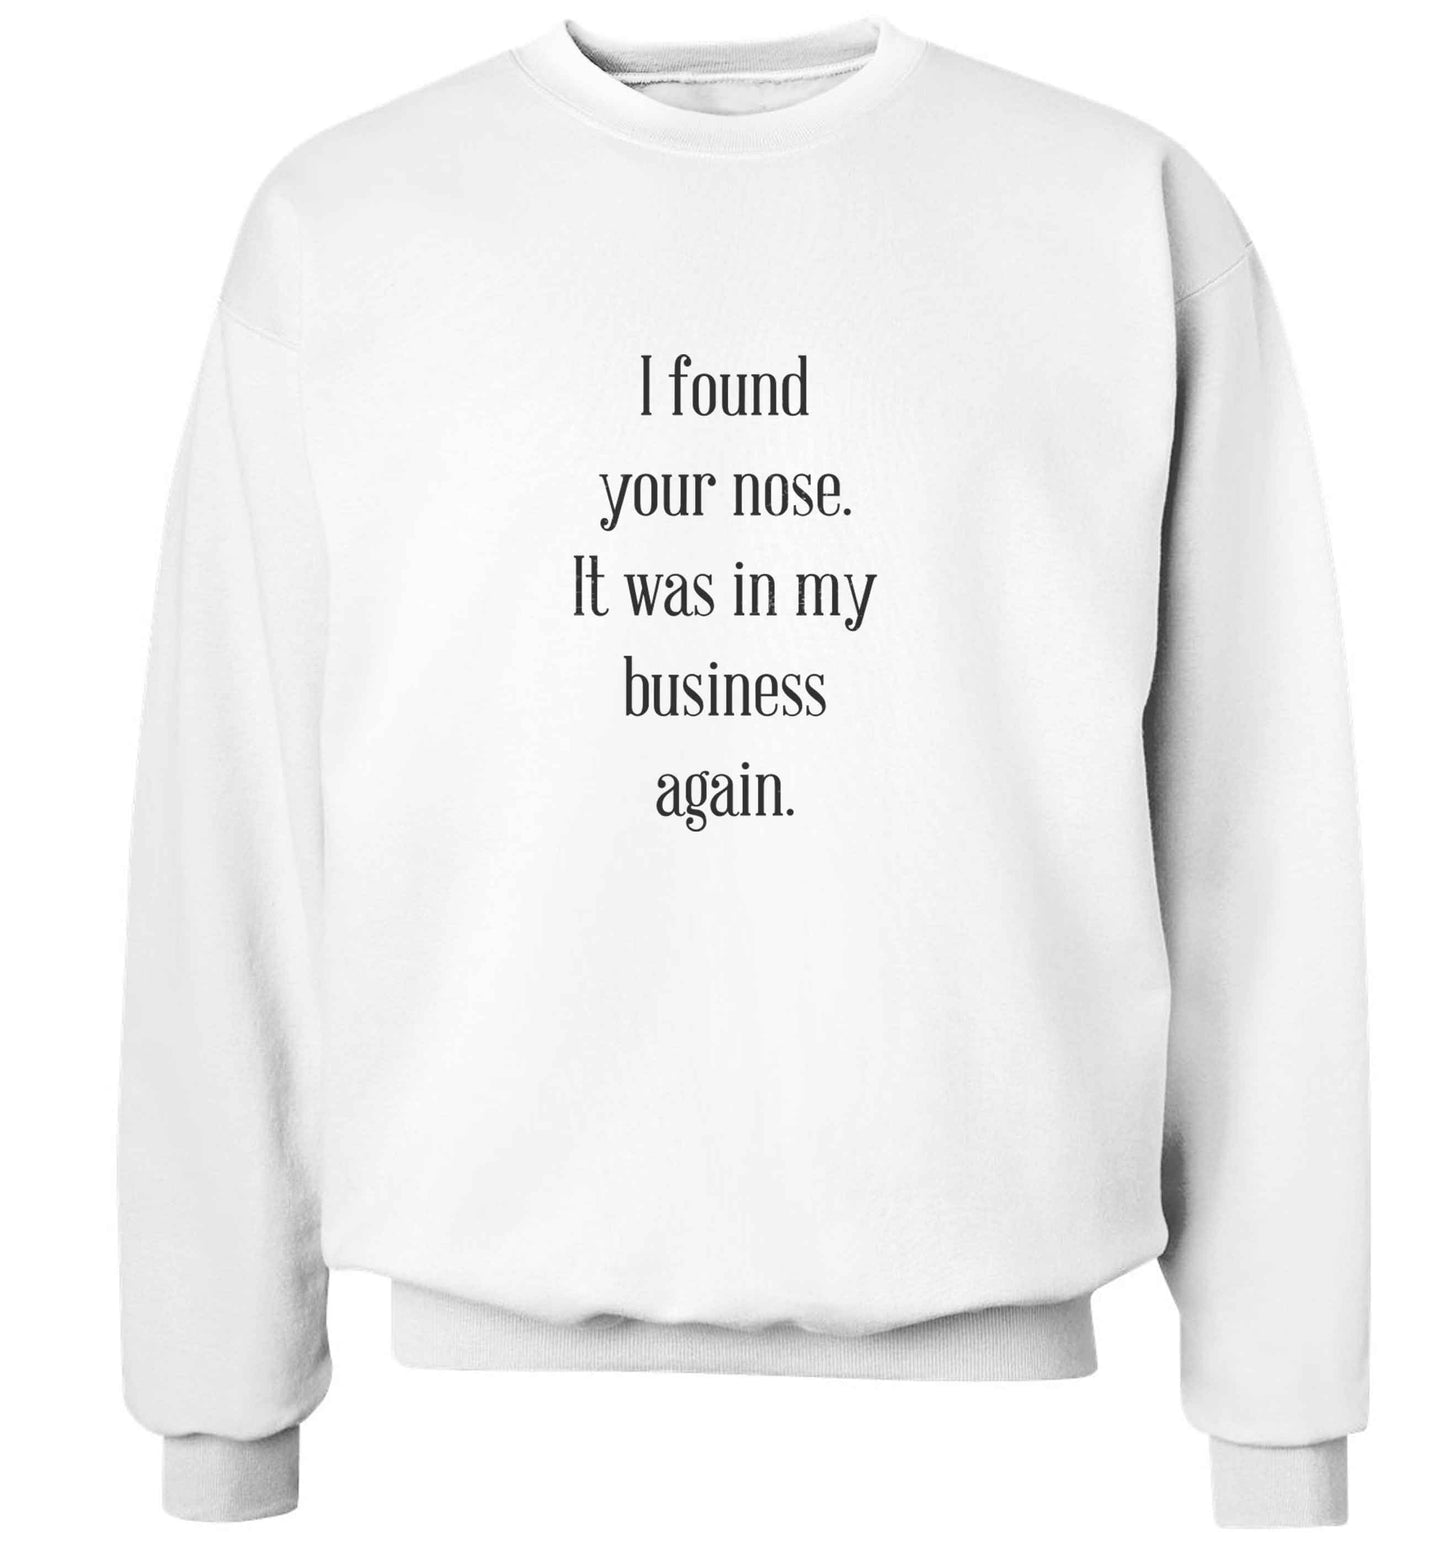 I found your nose it was in my business again adult's unisex white sweater 2XL